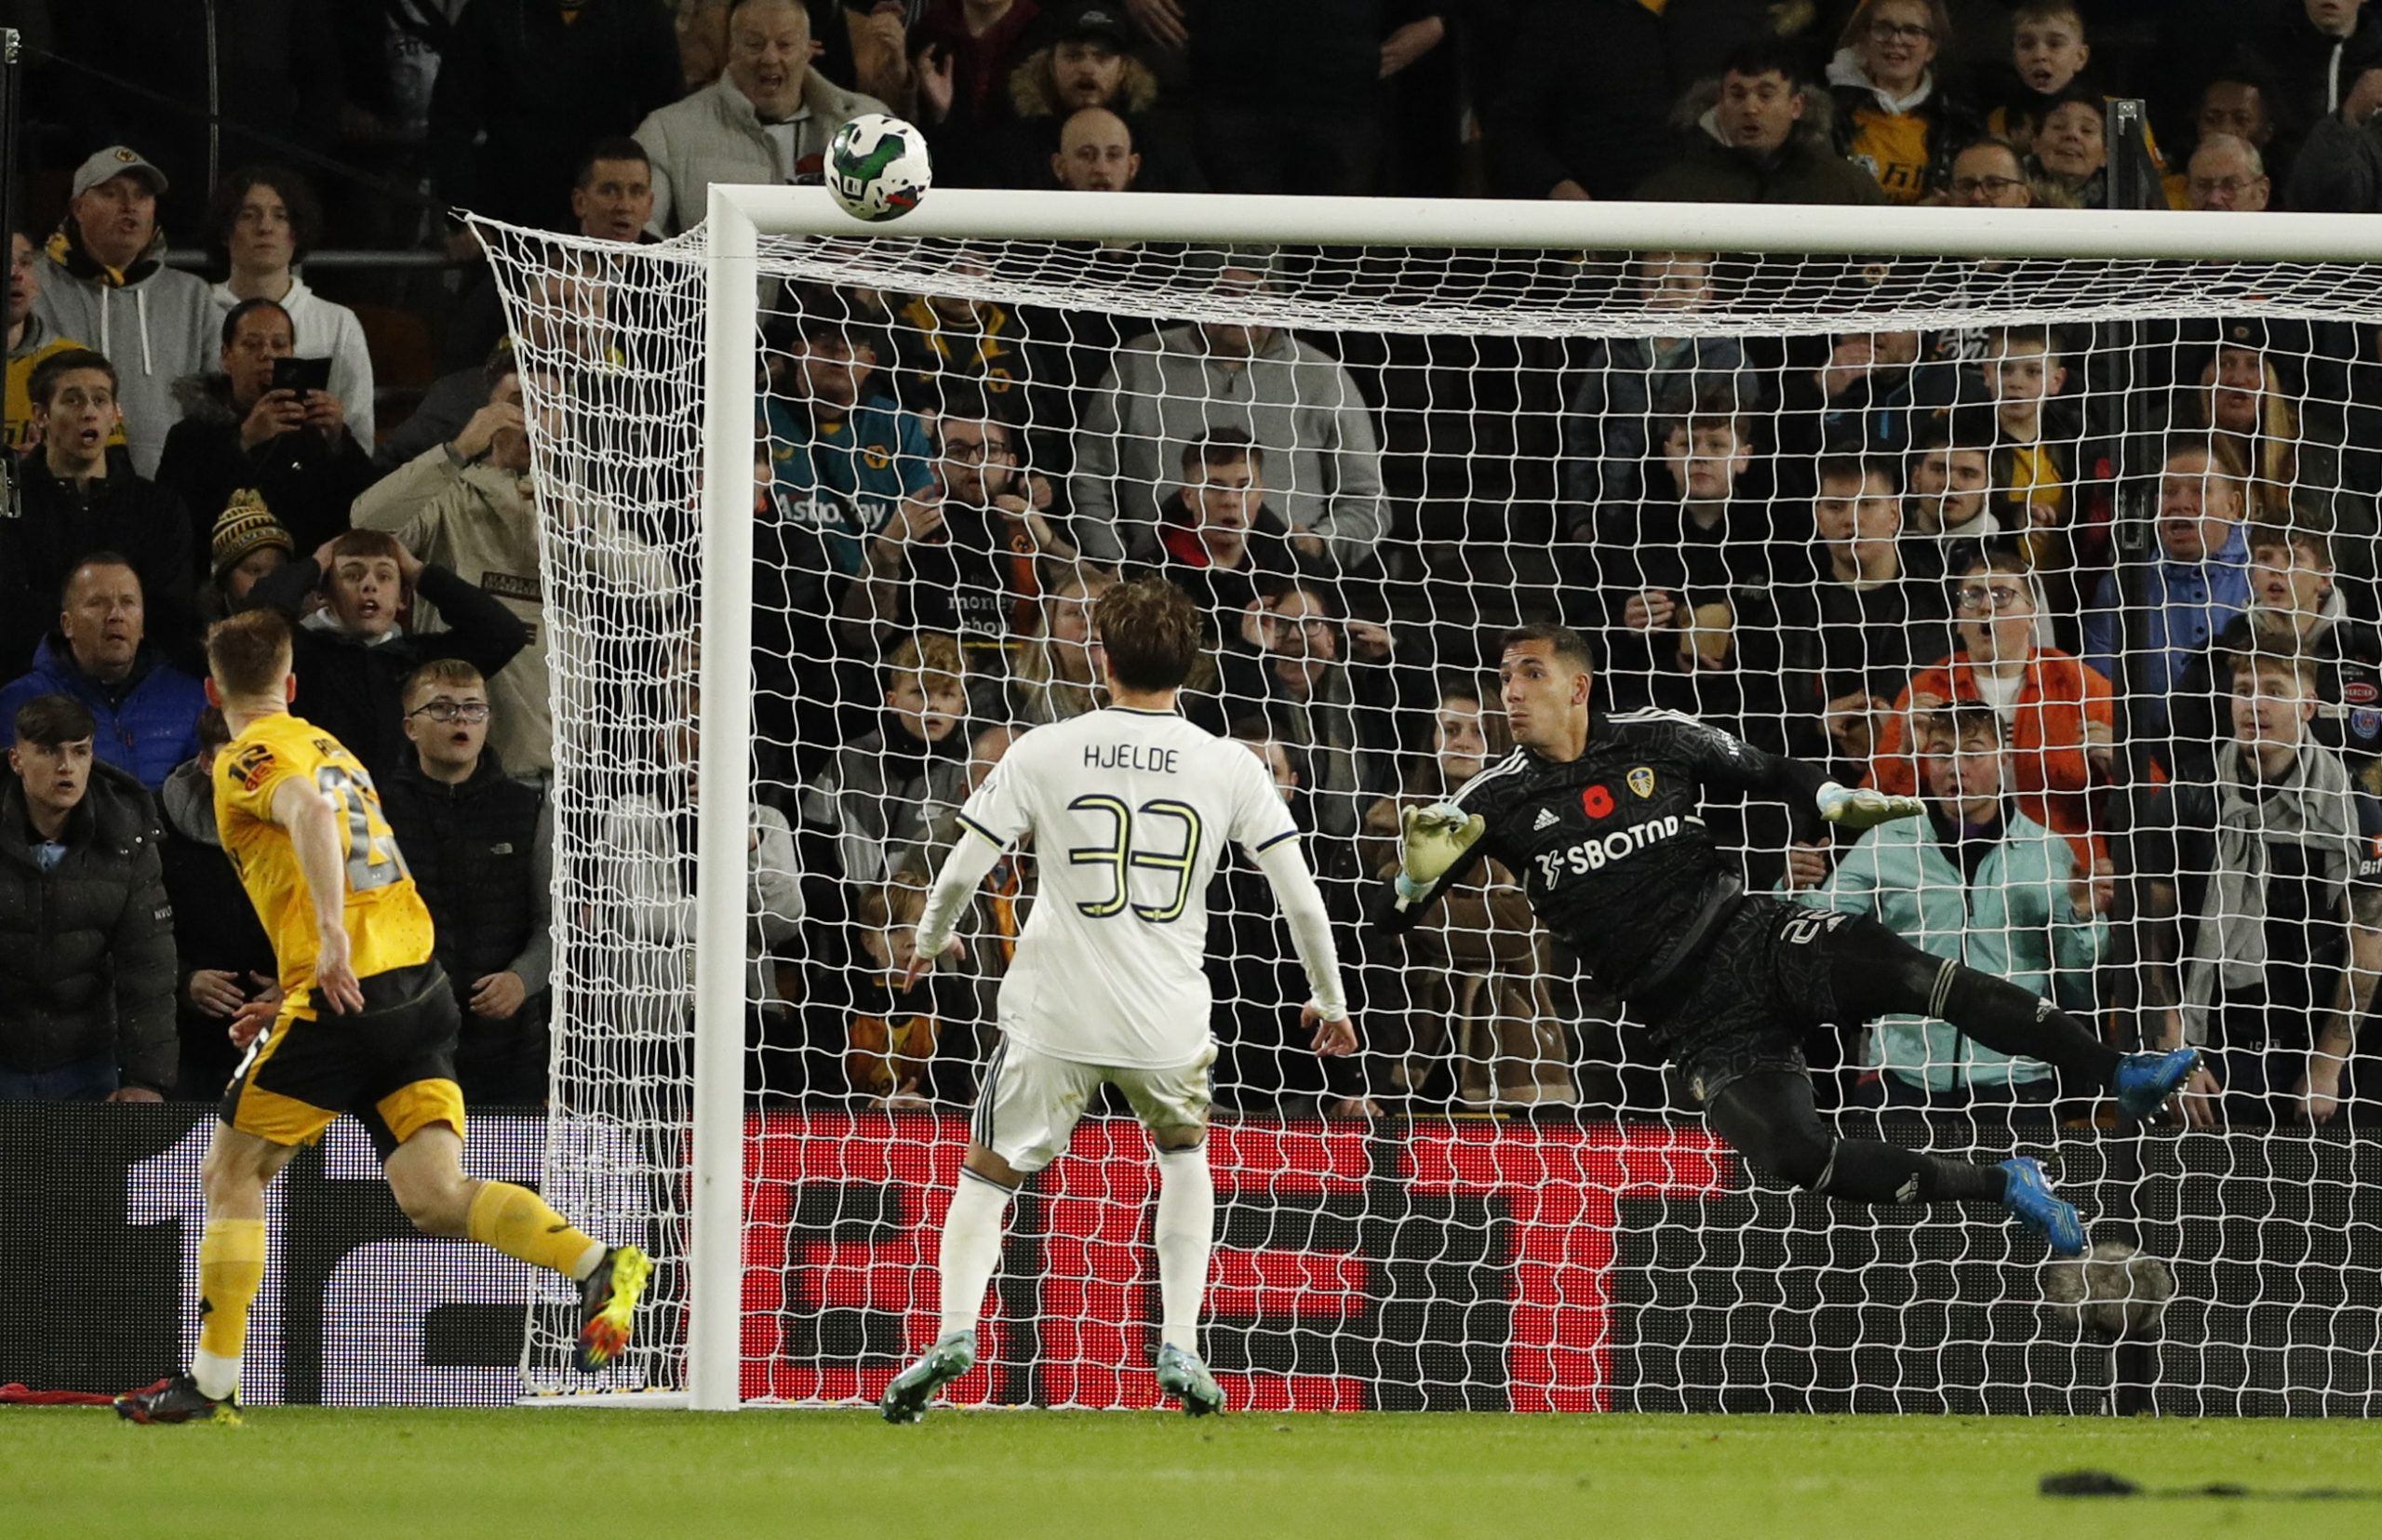 Soccer Football - Carabao Cup Third Round - Wolverhampton Wanderers v Leeds United - Molineux Stadium, Wolverhampton, Britain - November 9, 2022 Wolverhampton Wanderers' Connor Ronan shoots at goal Action Images via Reuters/Andrew Boyers EDITORIAL USE ONLY. No use with unauthorized audio, video, data, fixture lists, club/league logos or 'live' services. Online in-match use limited to 75 images, no video emulation. No use in betting, games or single club /league/player publications.  Please conta